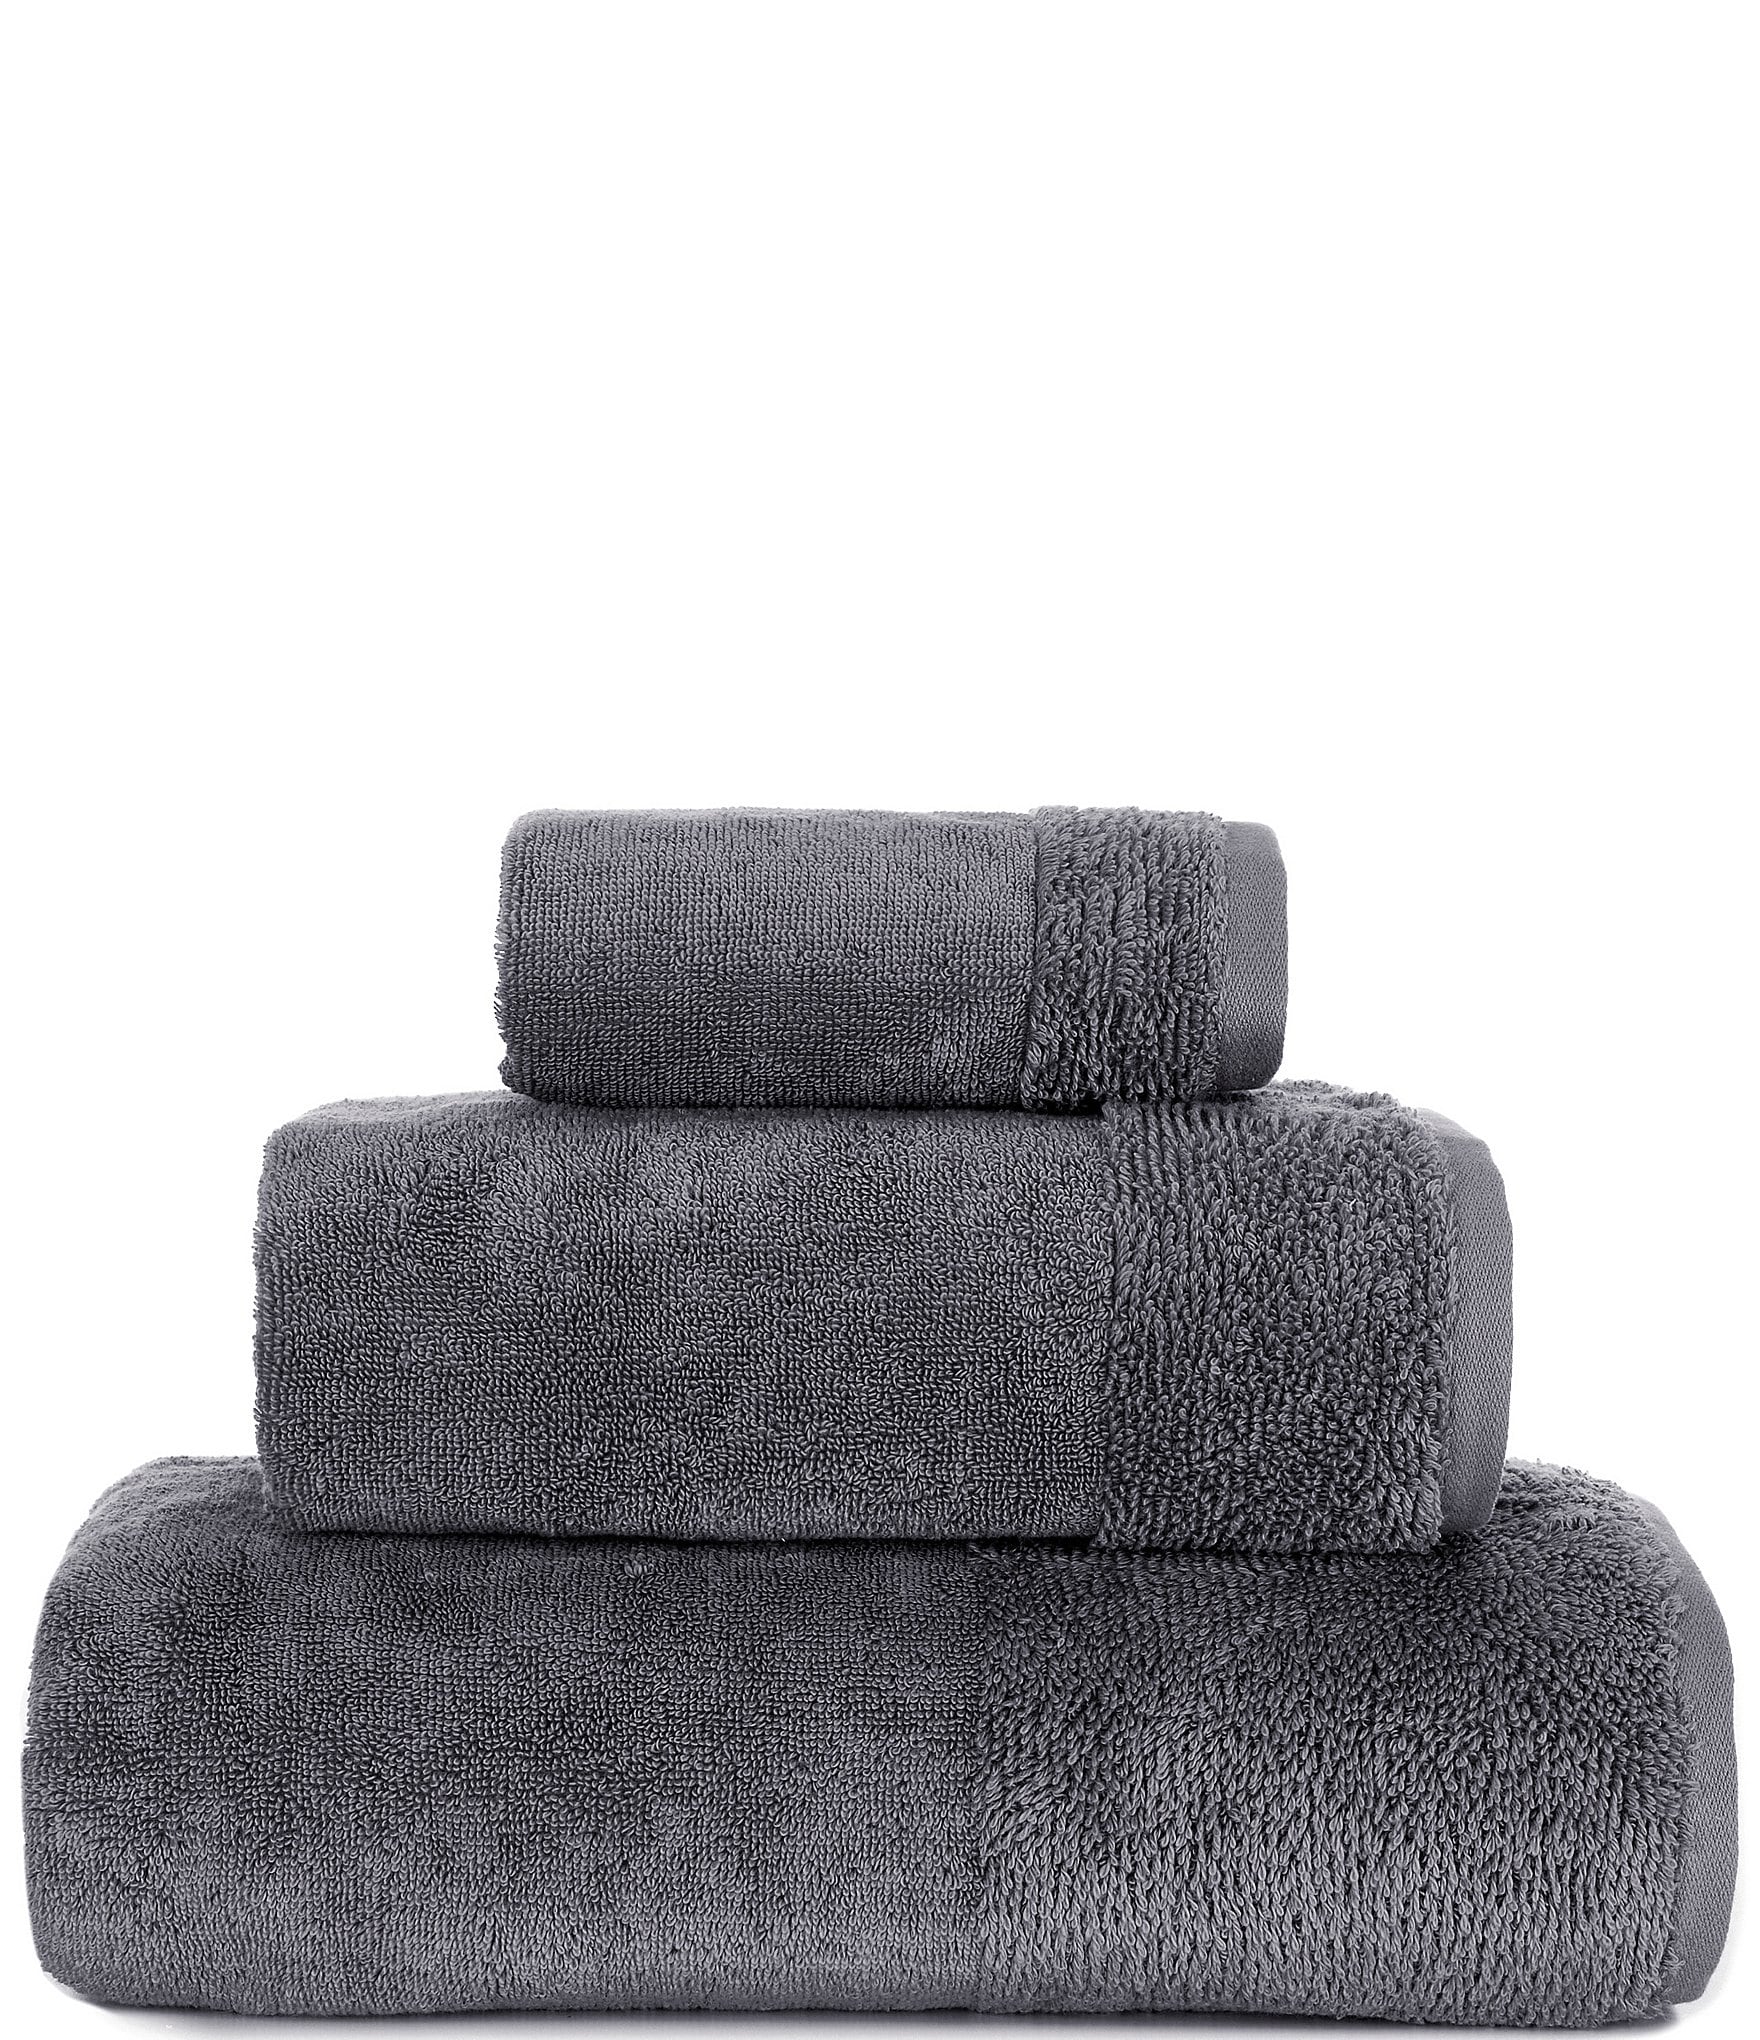 Hotel towels from Douxe, Luxury set, Anthracite